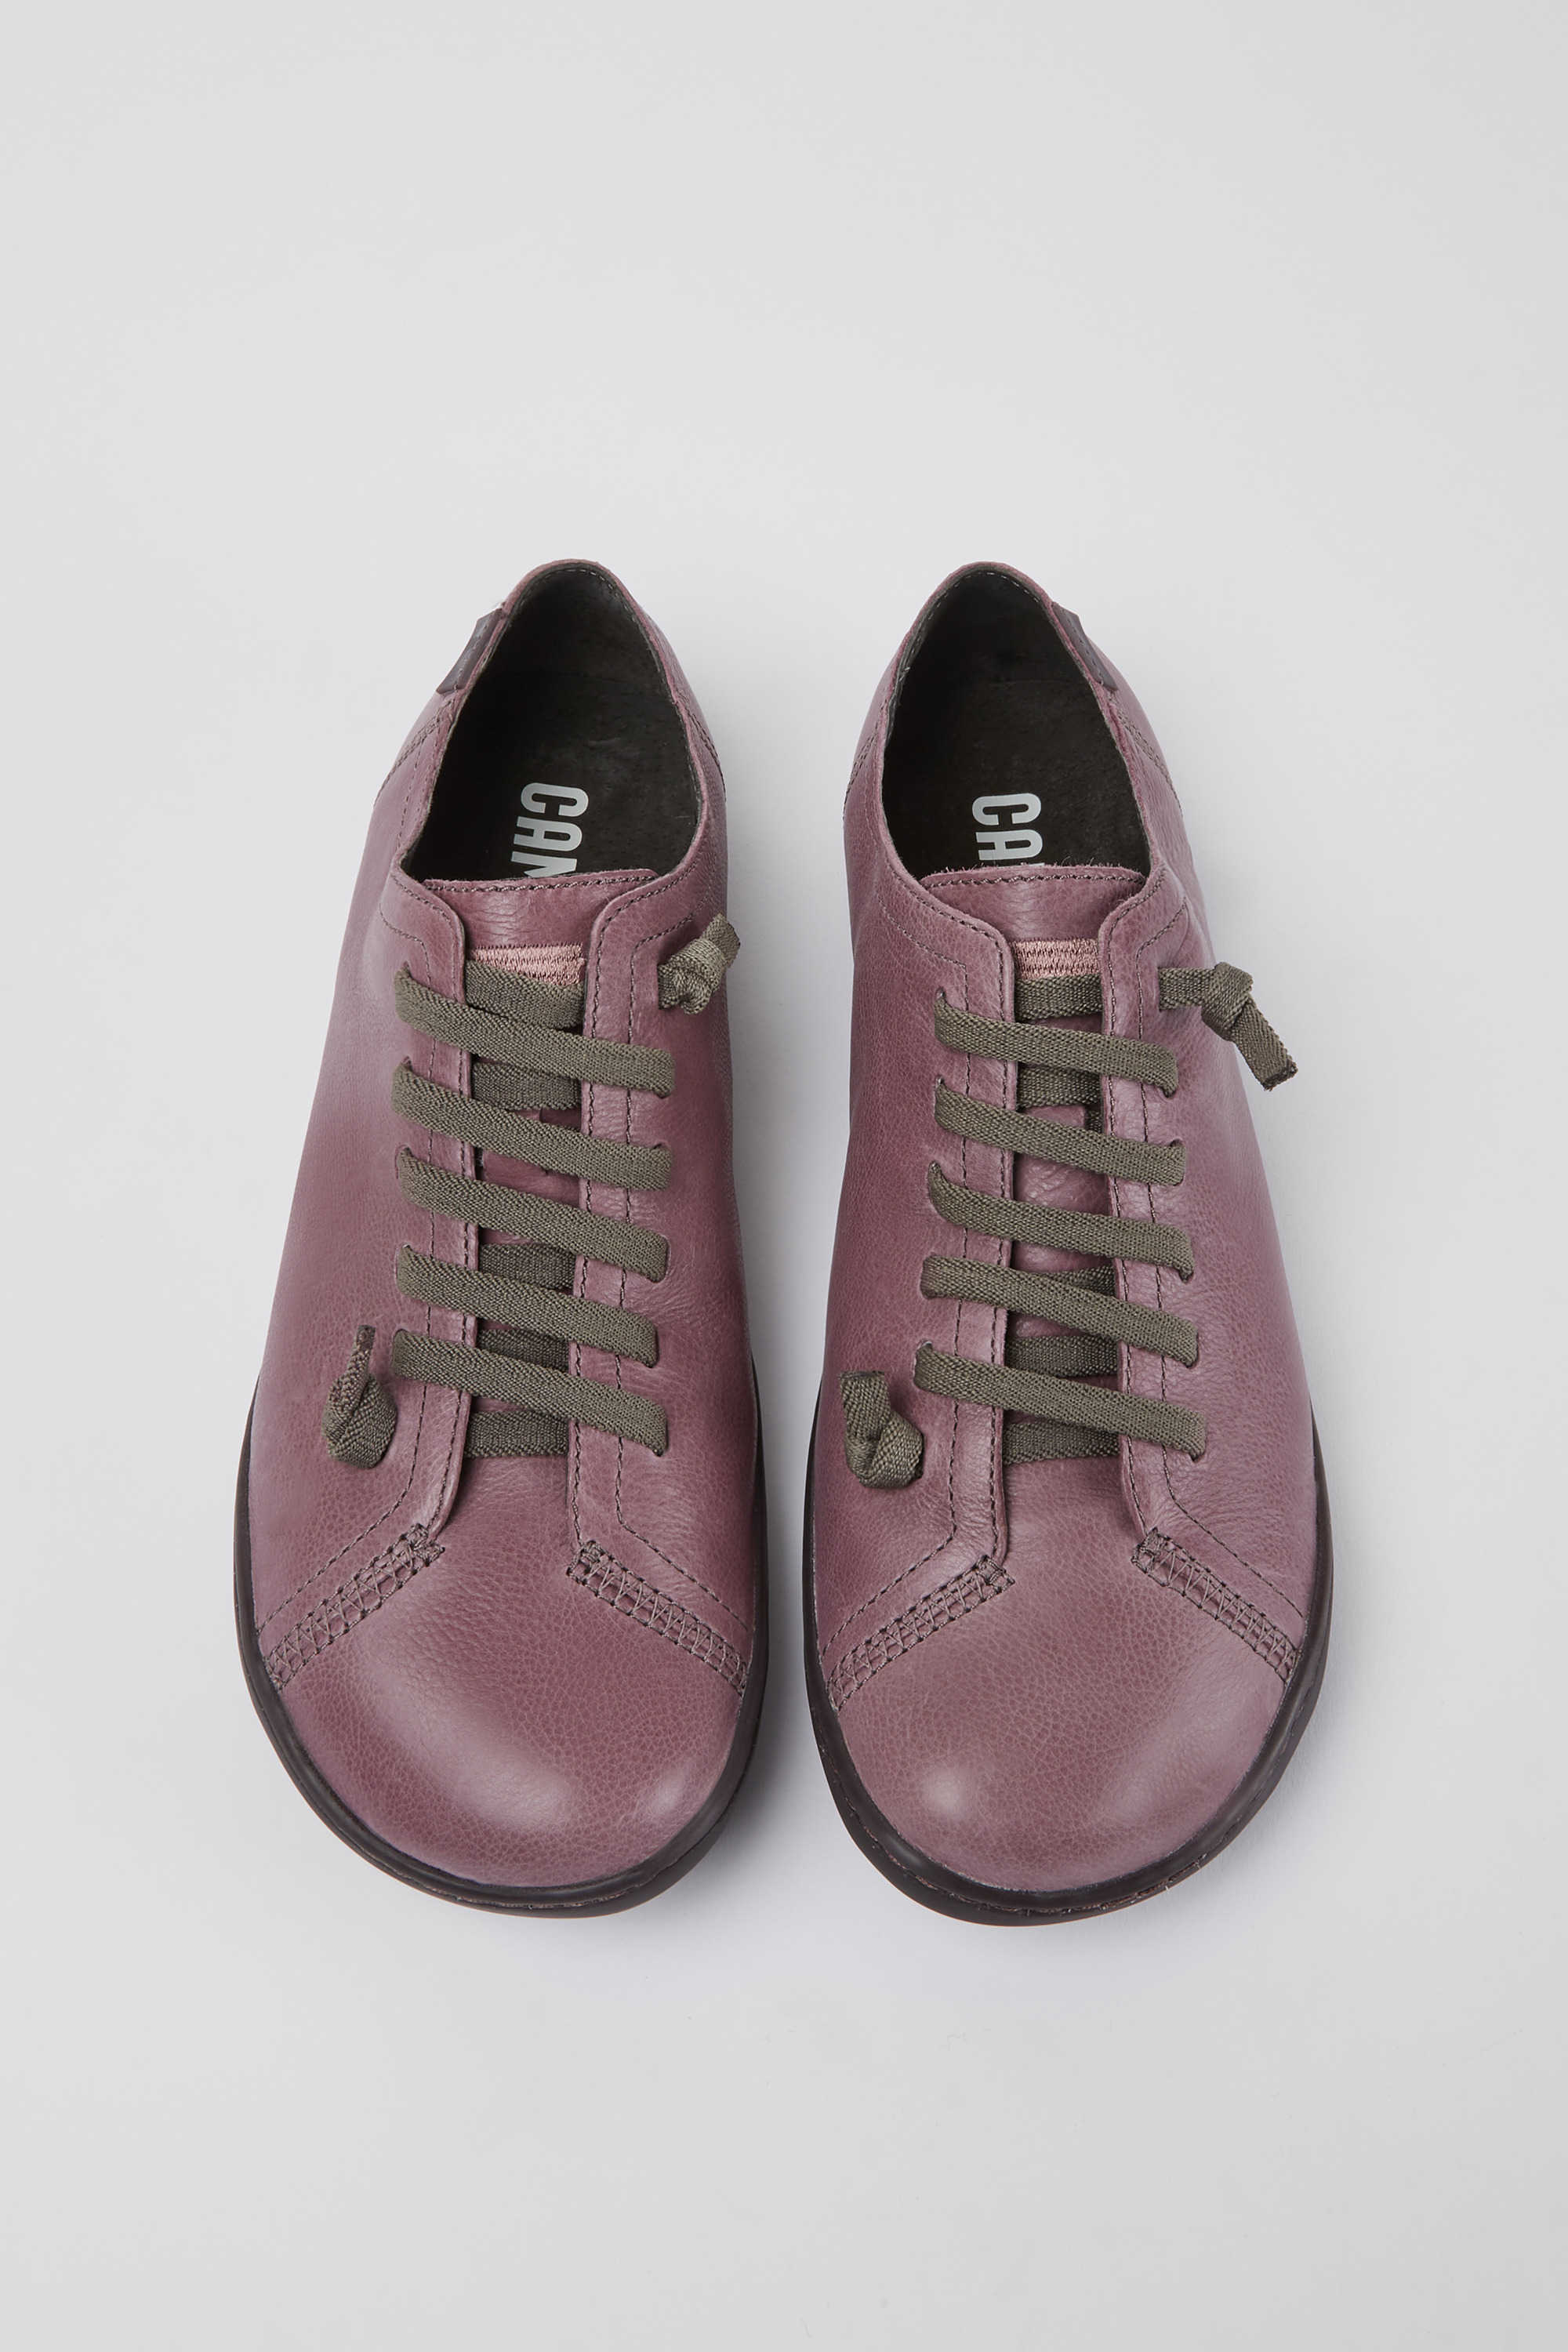 Shoes for Women - Fall/Winter Collection - Camper Hong Kong